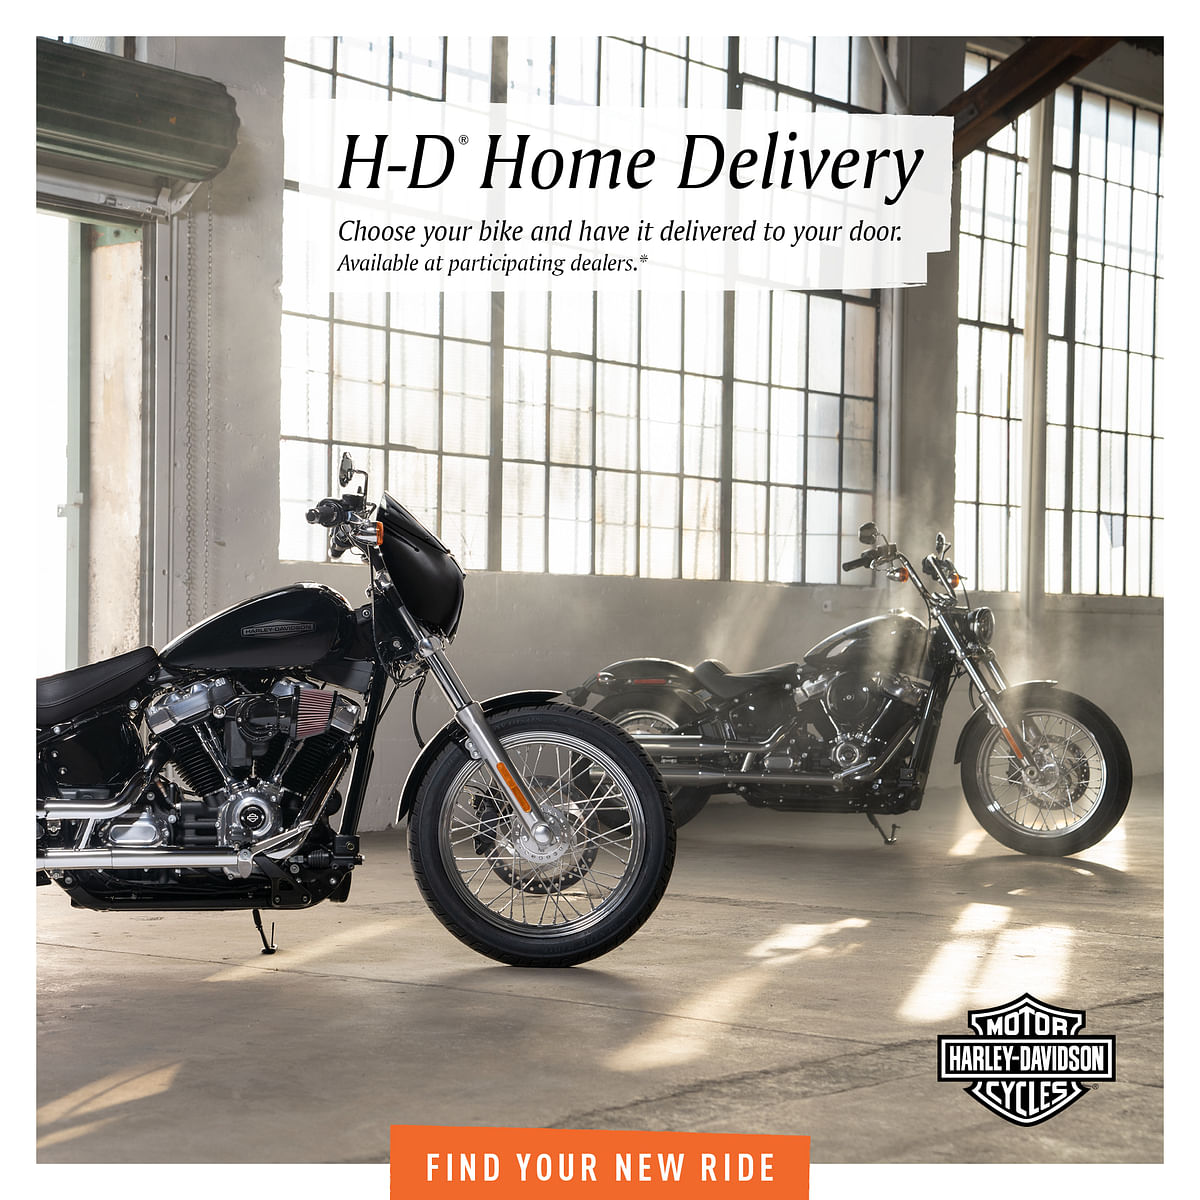 Harley-Davidson India launches home delivery service for its motorcycles among other initiatives...